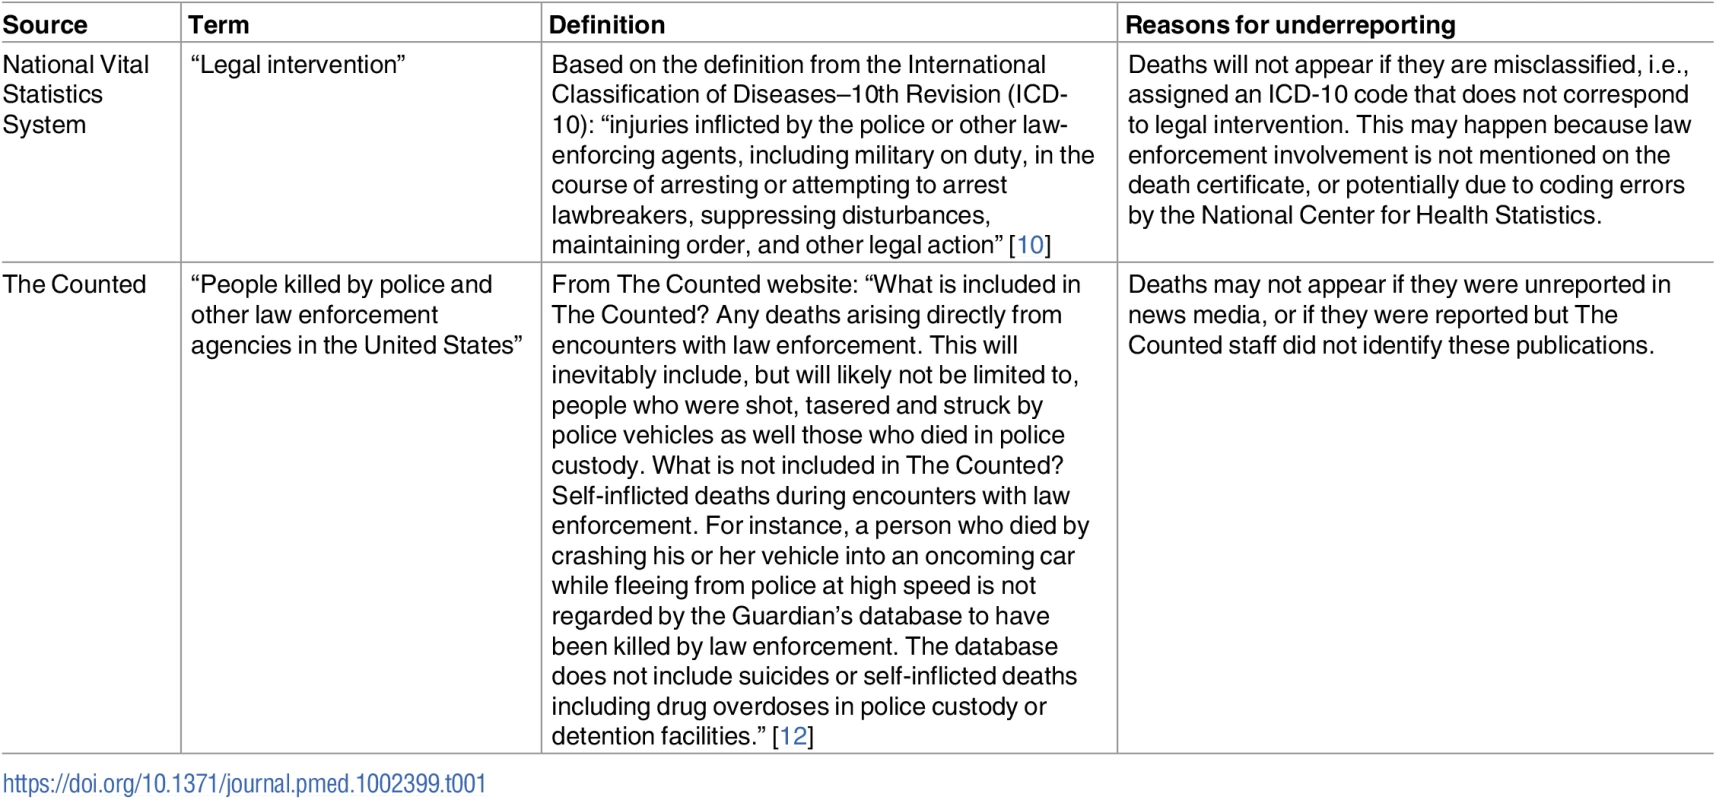 Definitions for law-enforcement-related deaths and reasons for underreporting in the National Vital Statistics System and The Counted.